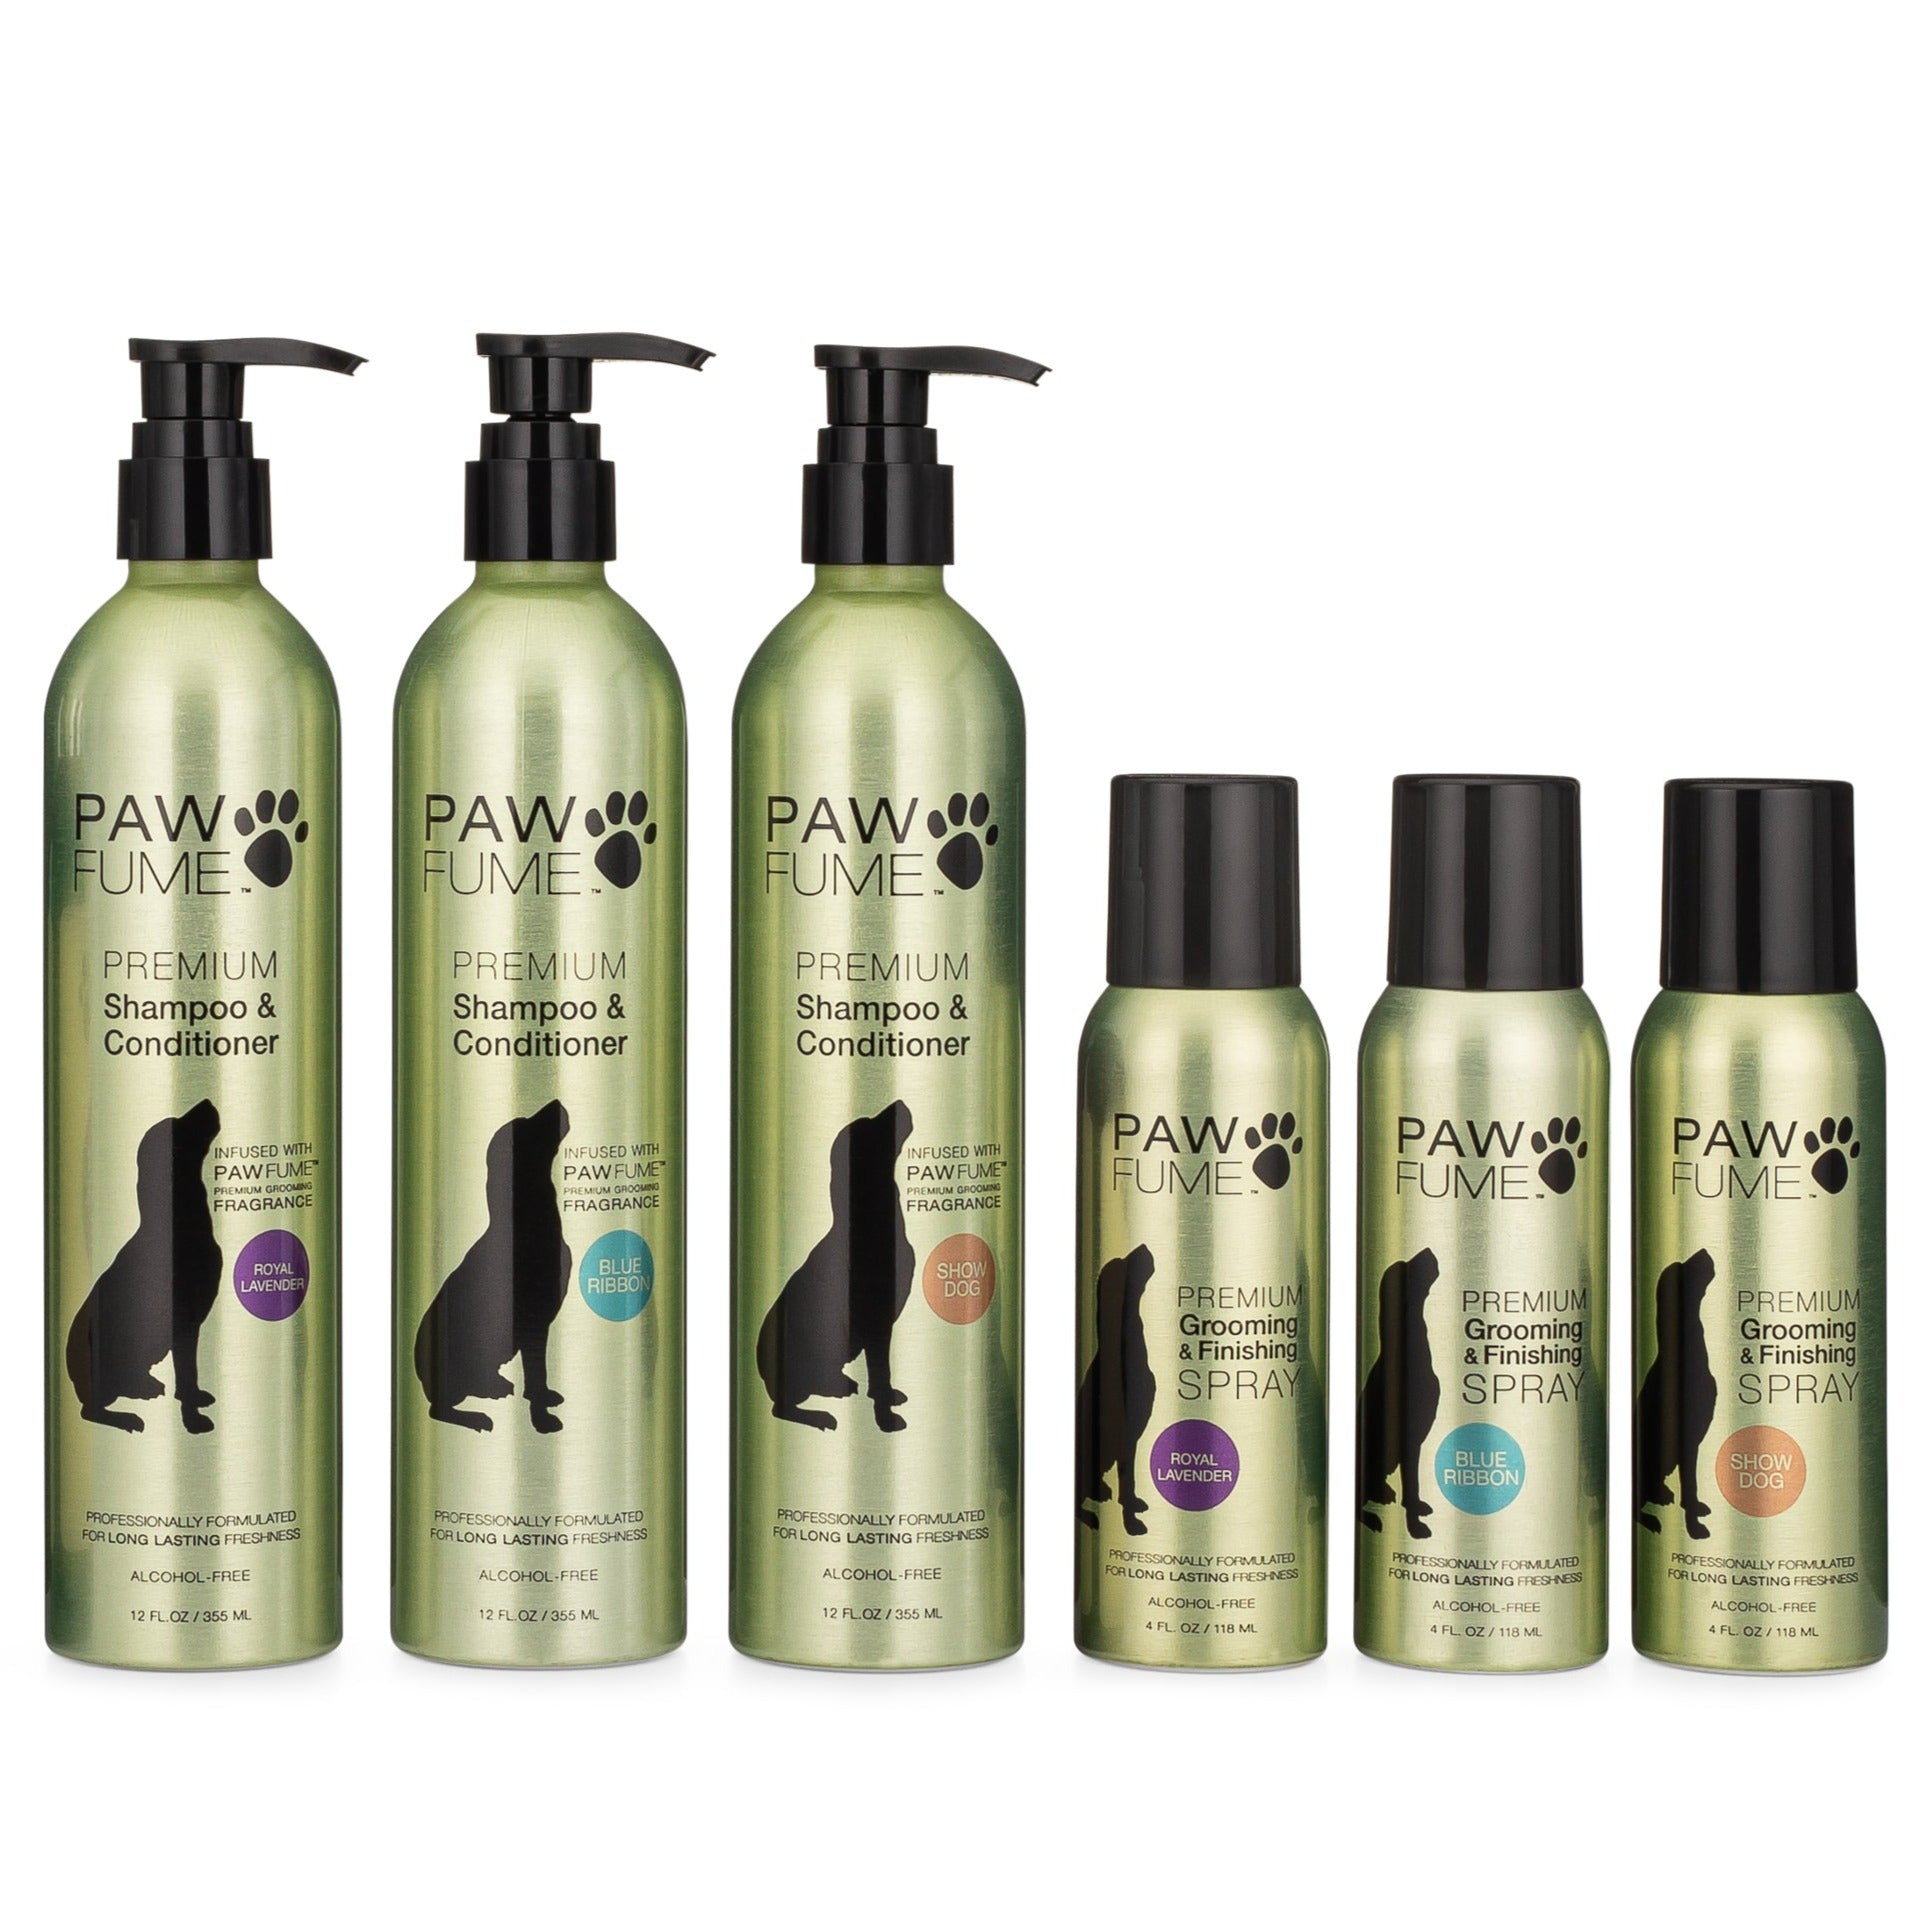 Free grooming product samples